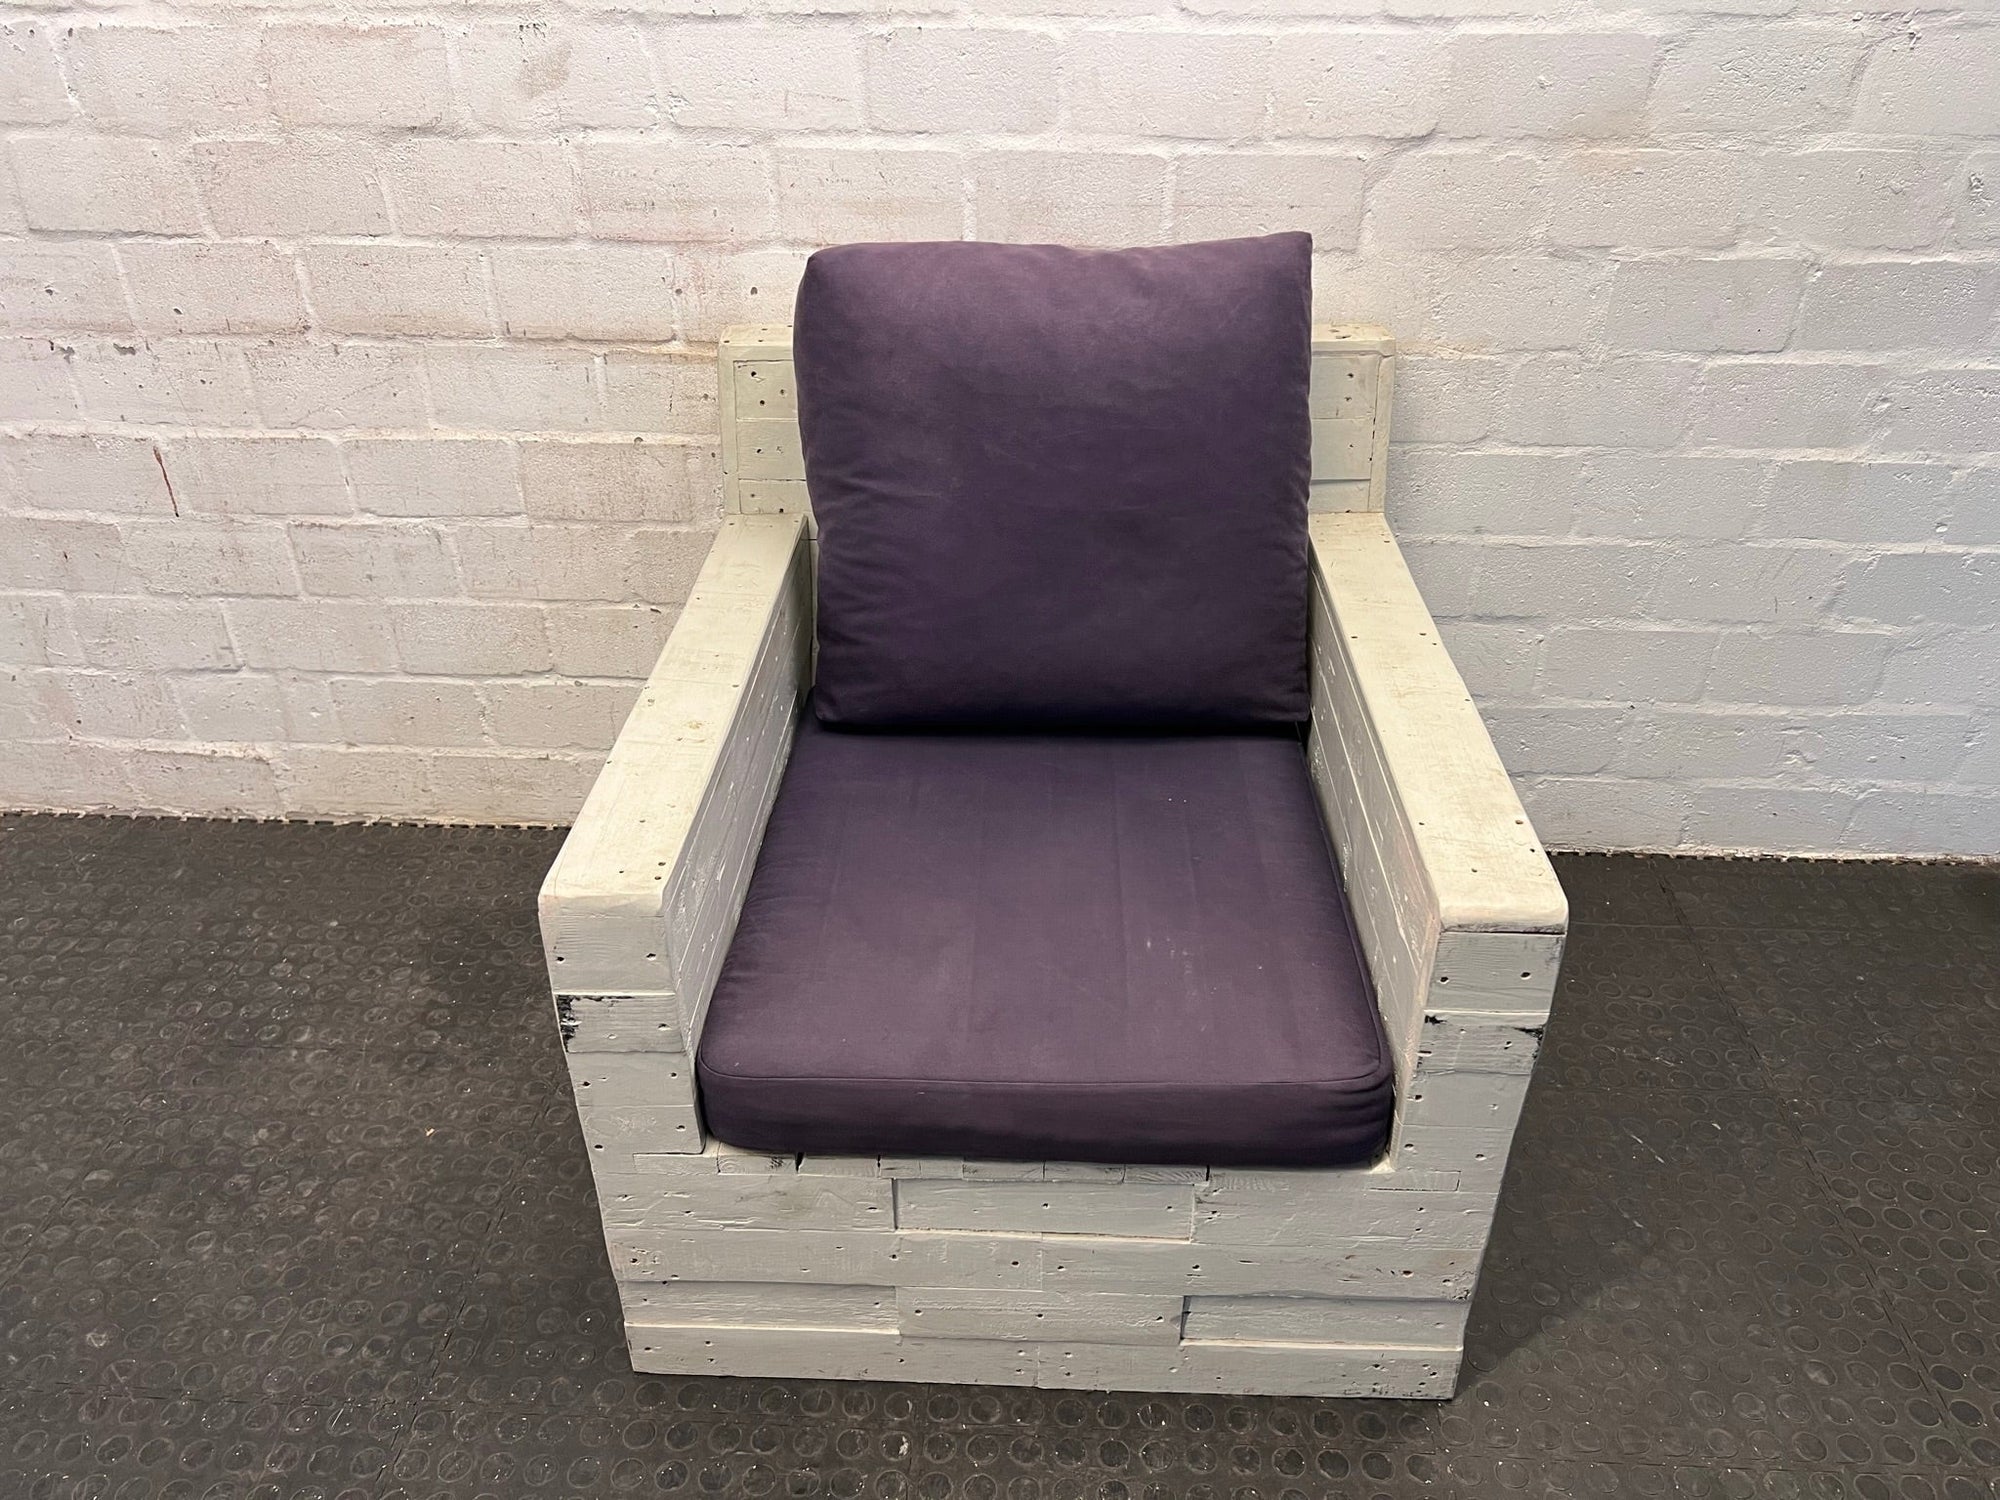 White Pallet Wood One Seater Couch with Deep Purple Cushions